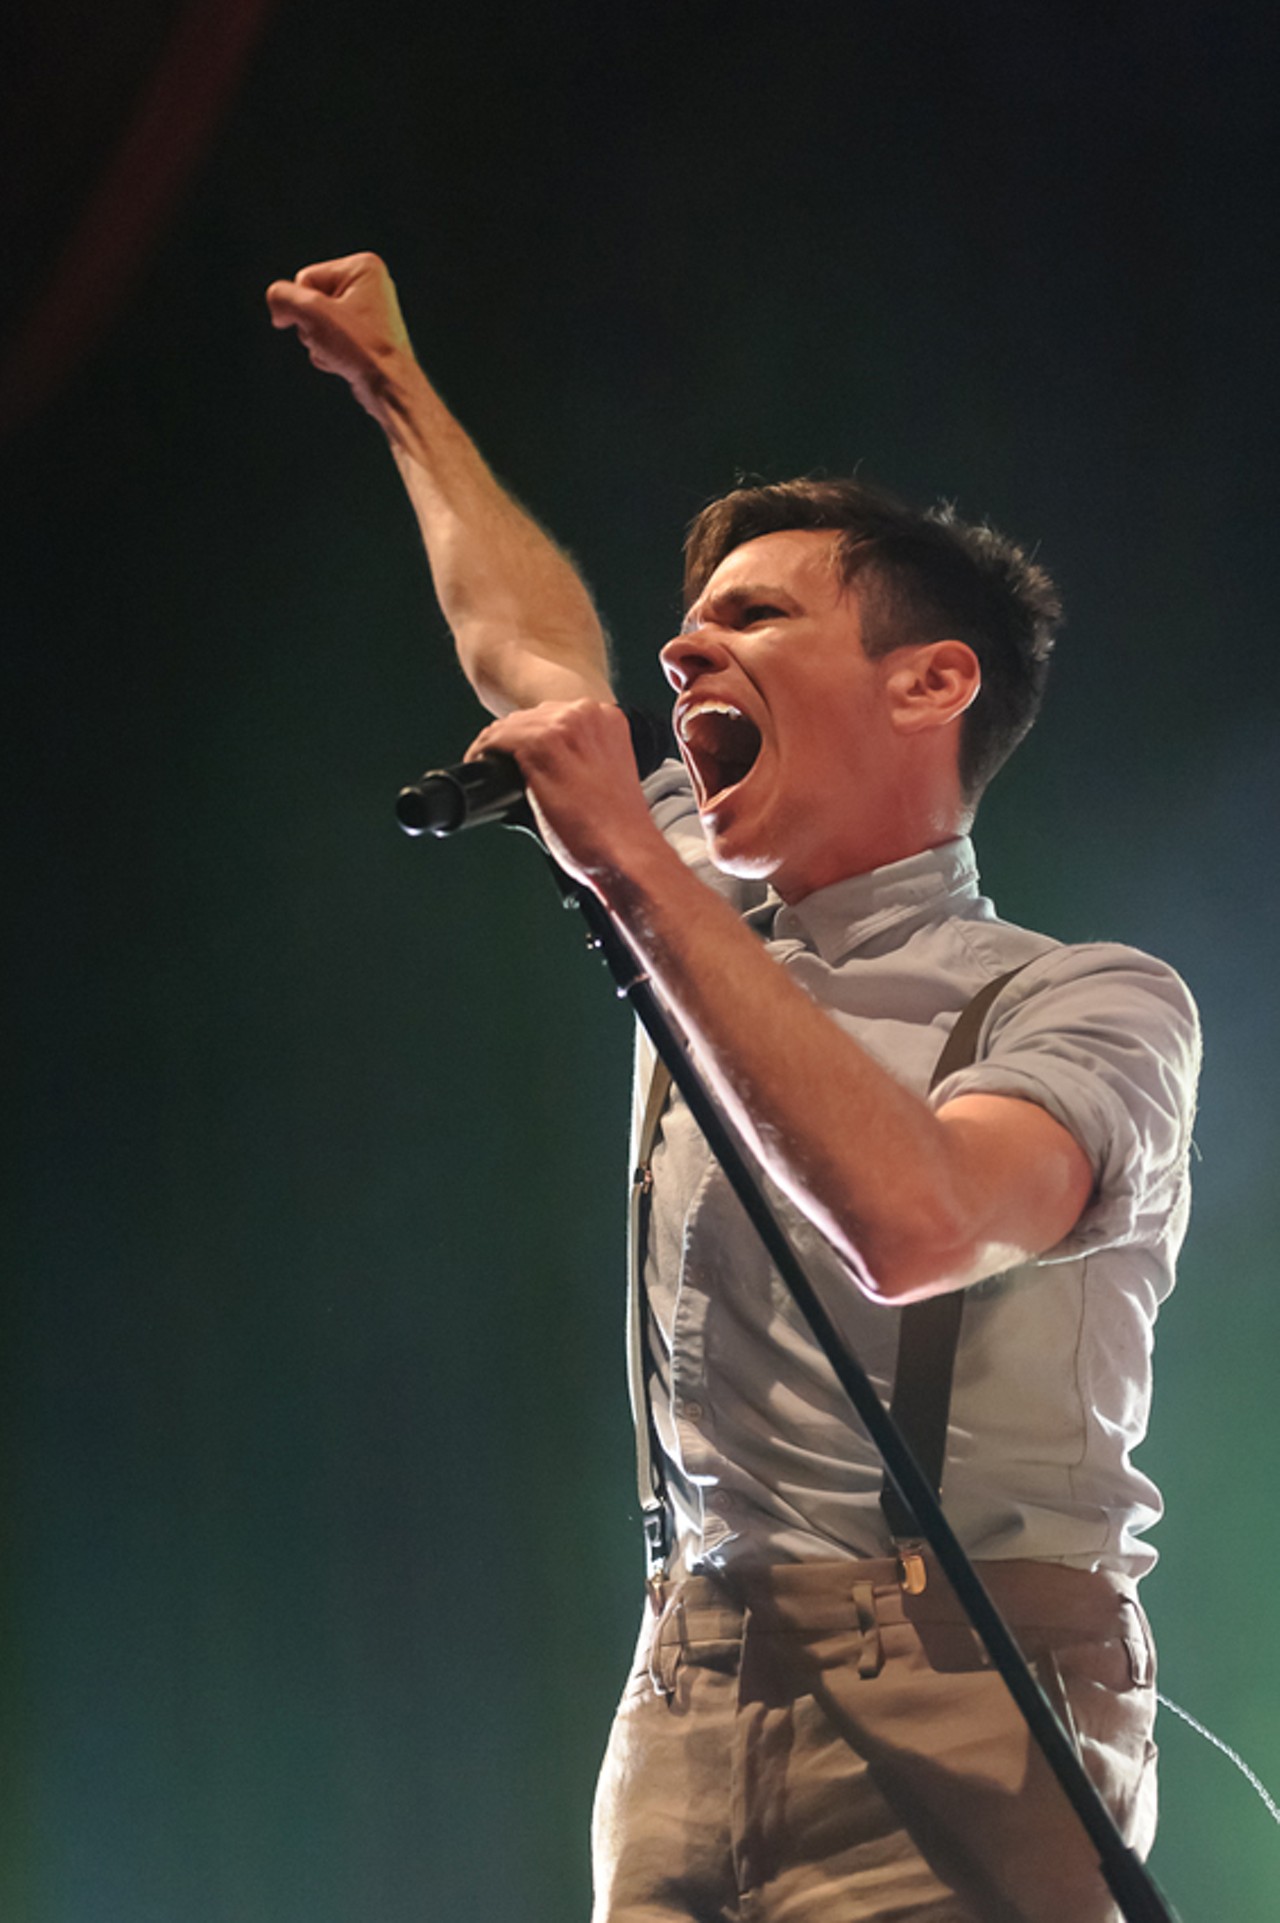 Nate Ruess of Fun. performing at The Pageant.